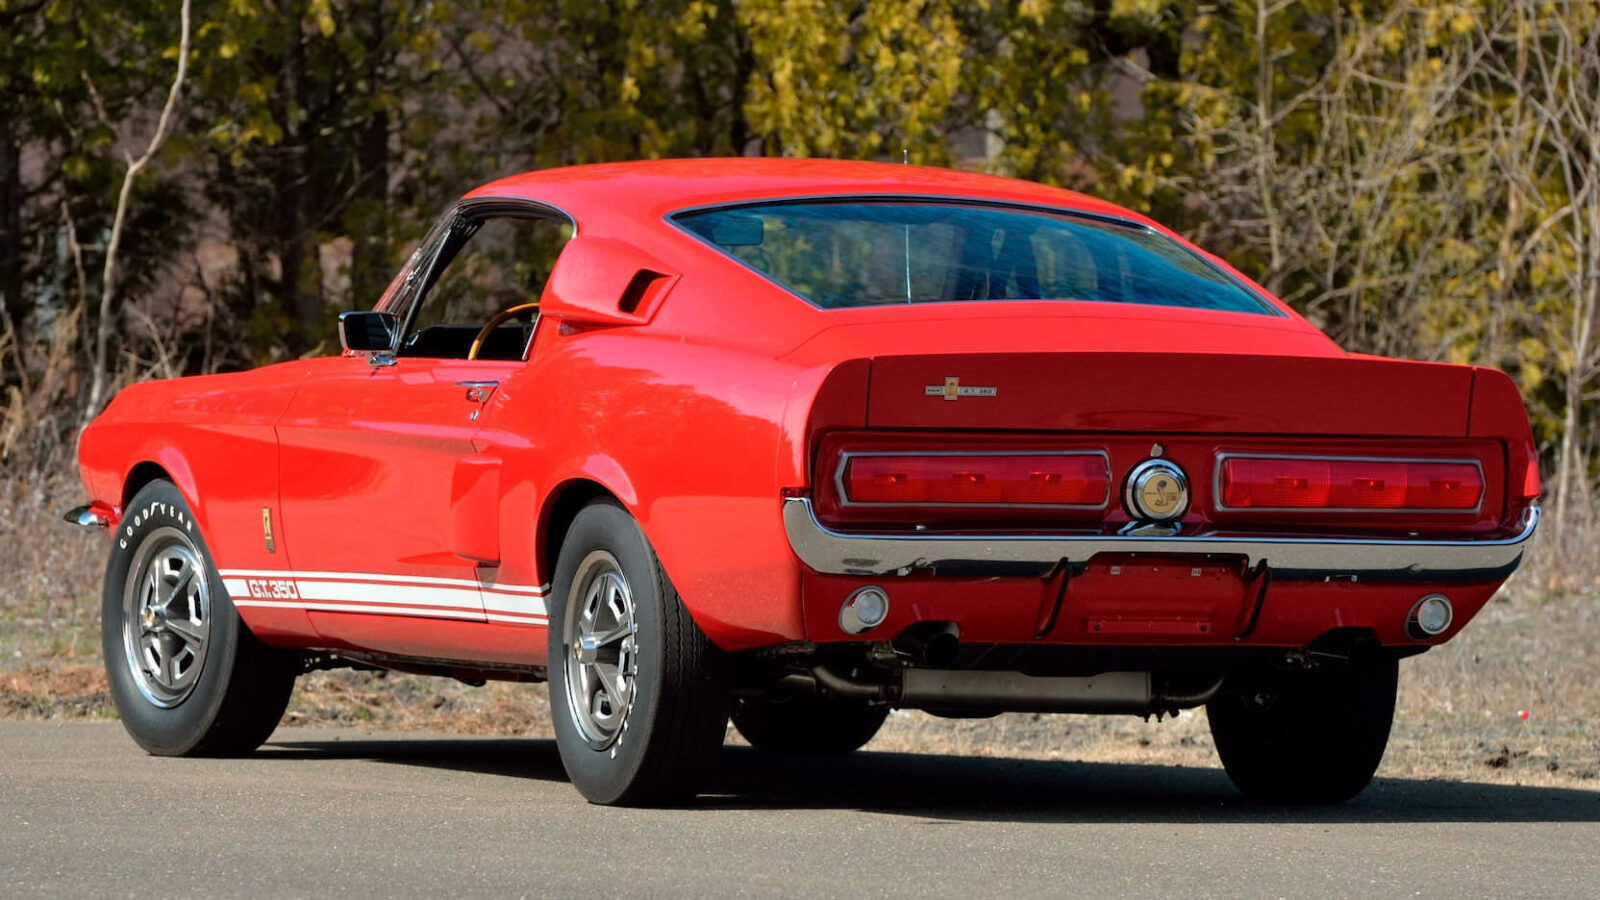 An Original Supercharged 1967 Shelby GT350